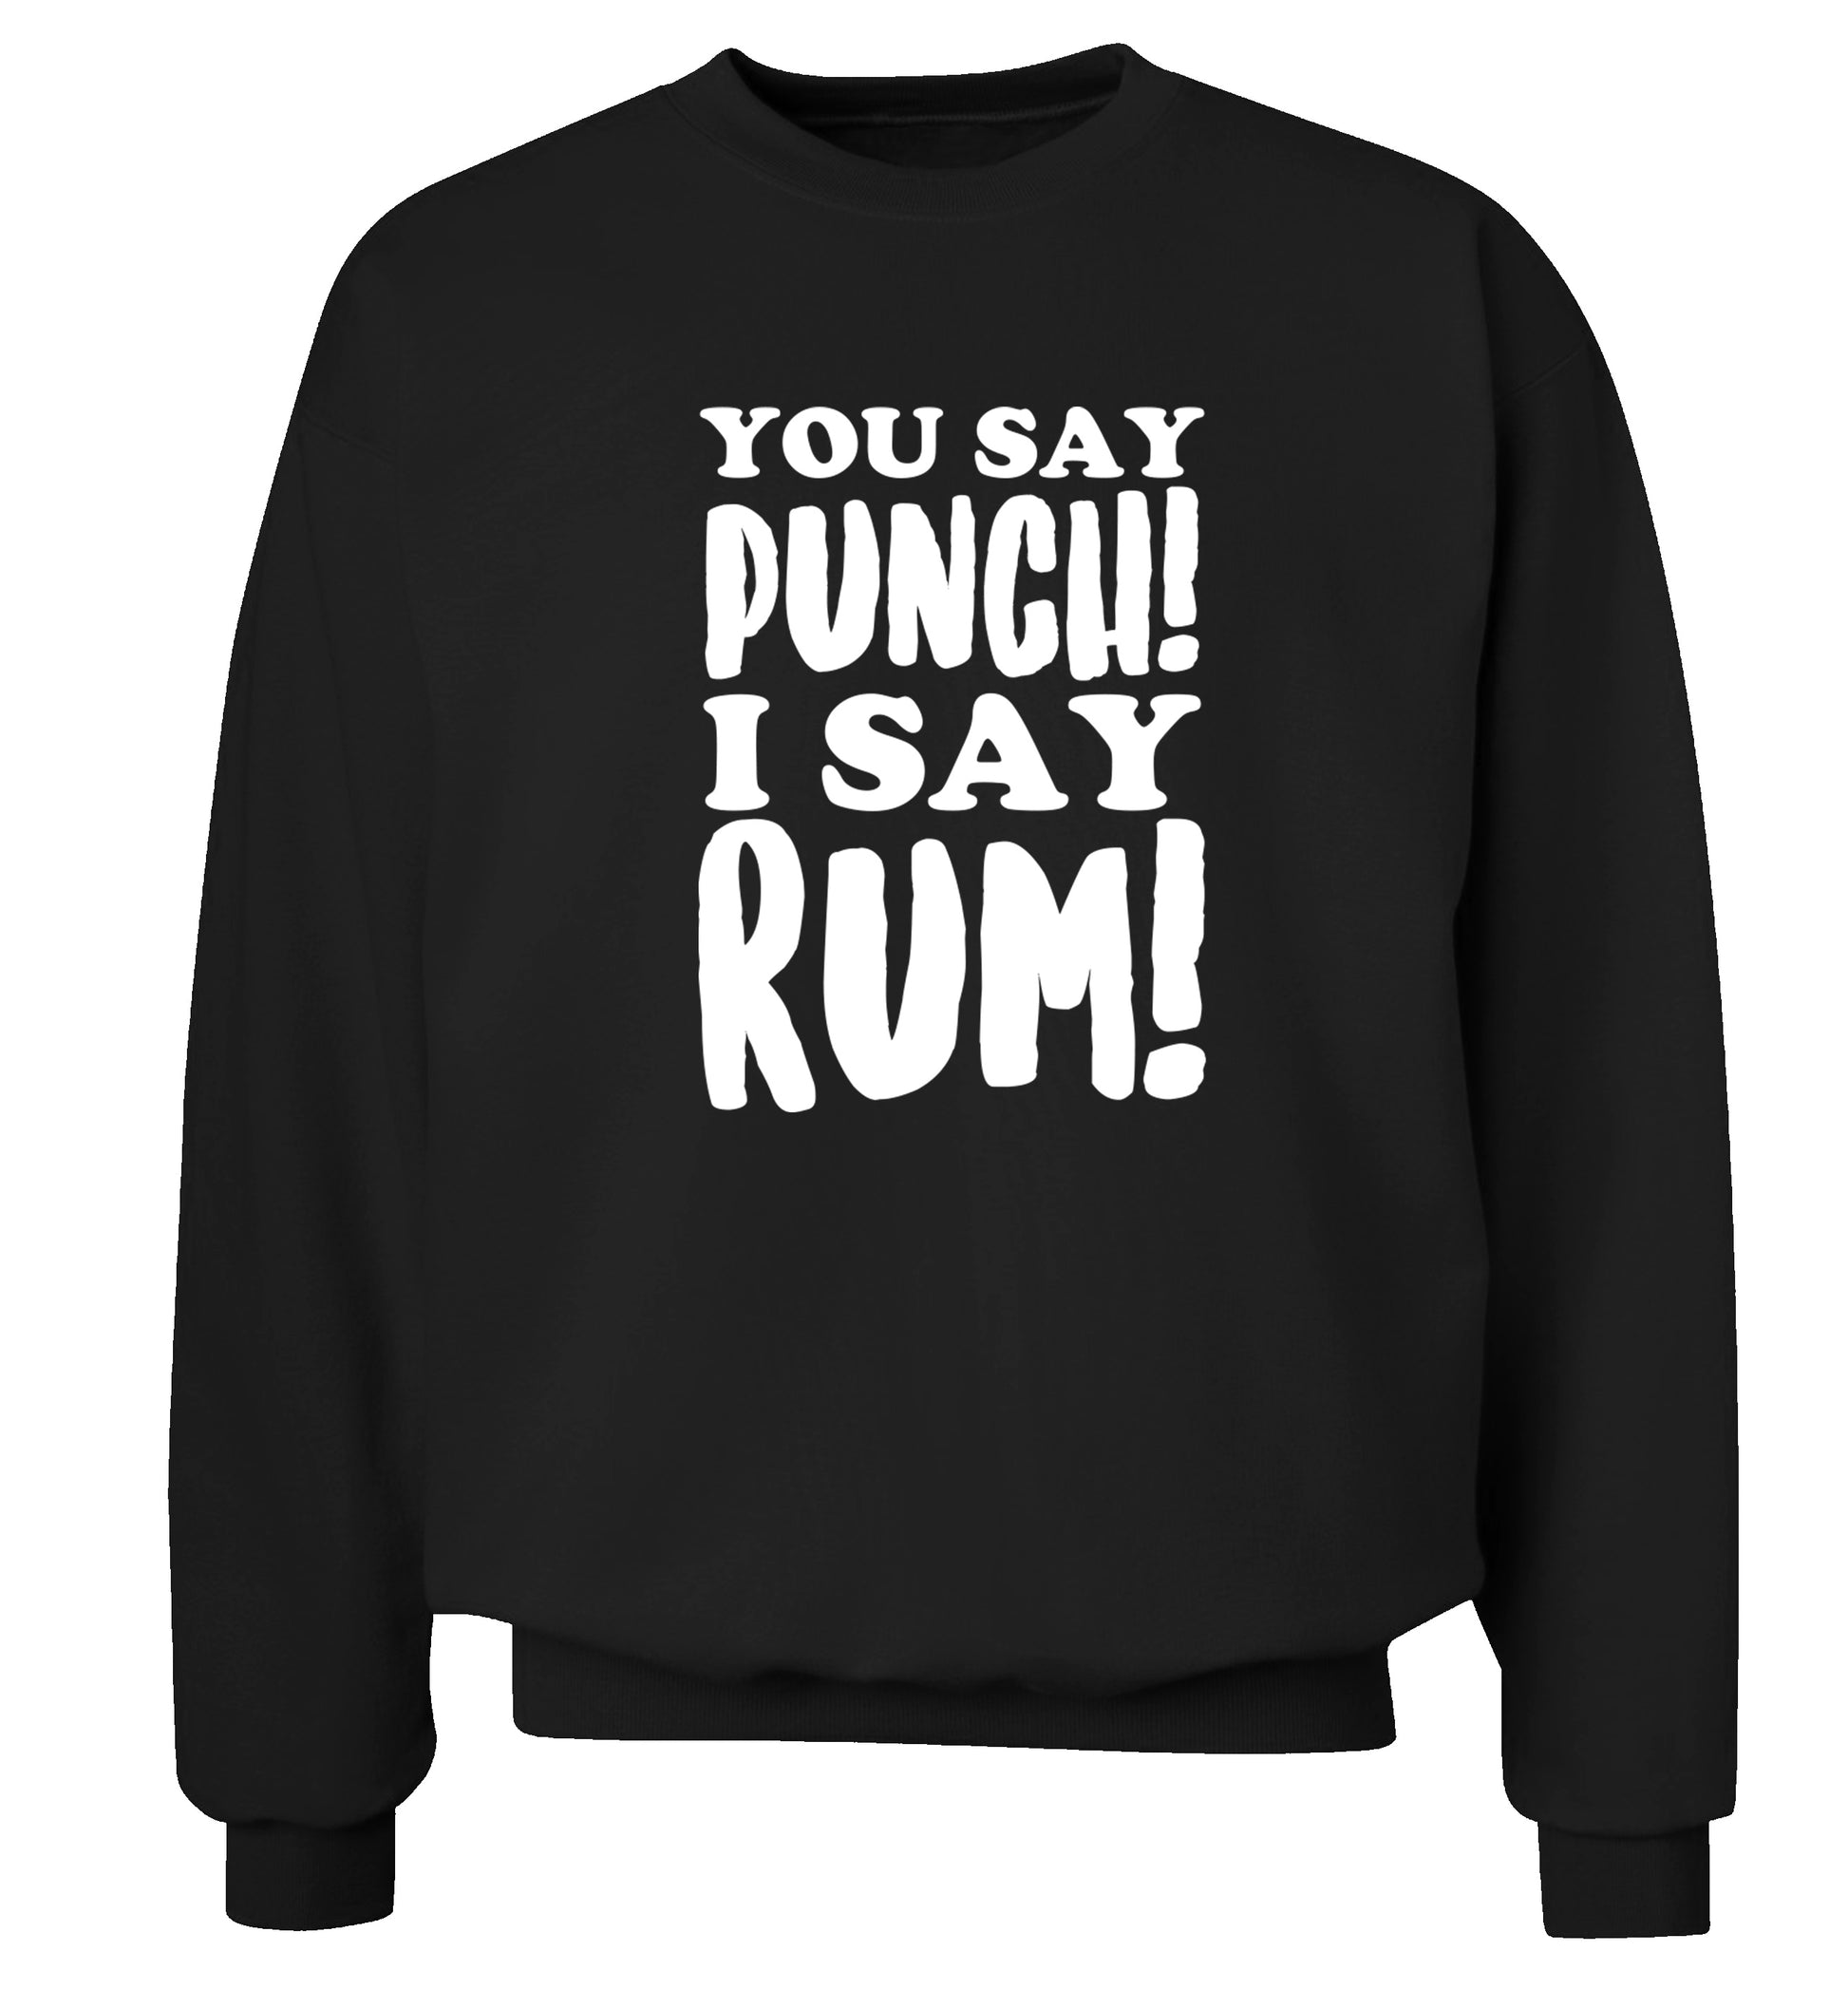 You say punch I say rum! Adult's unisex black Sweater 2XL